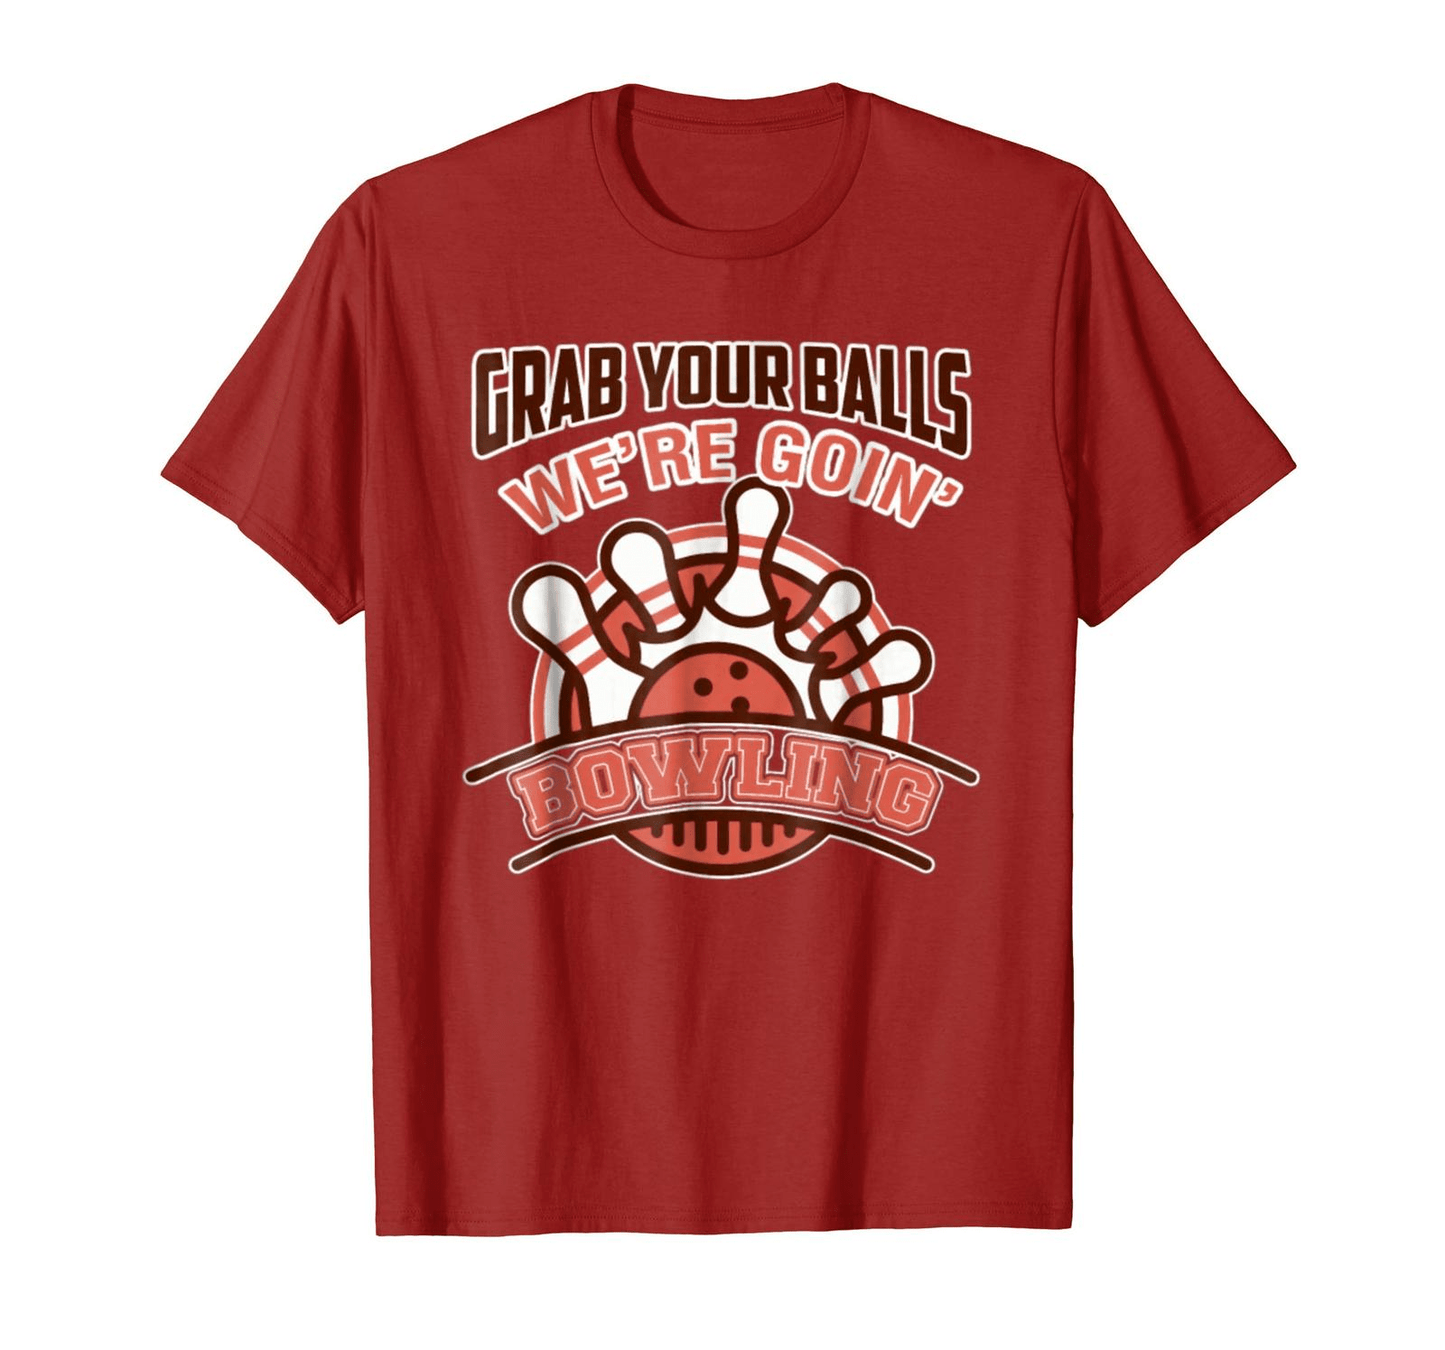 Grafisches Unisex-T-Shirt „Grab Your Balls We're Goin Bowling“. 